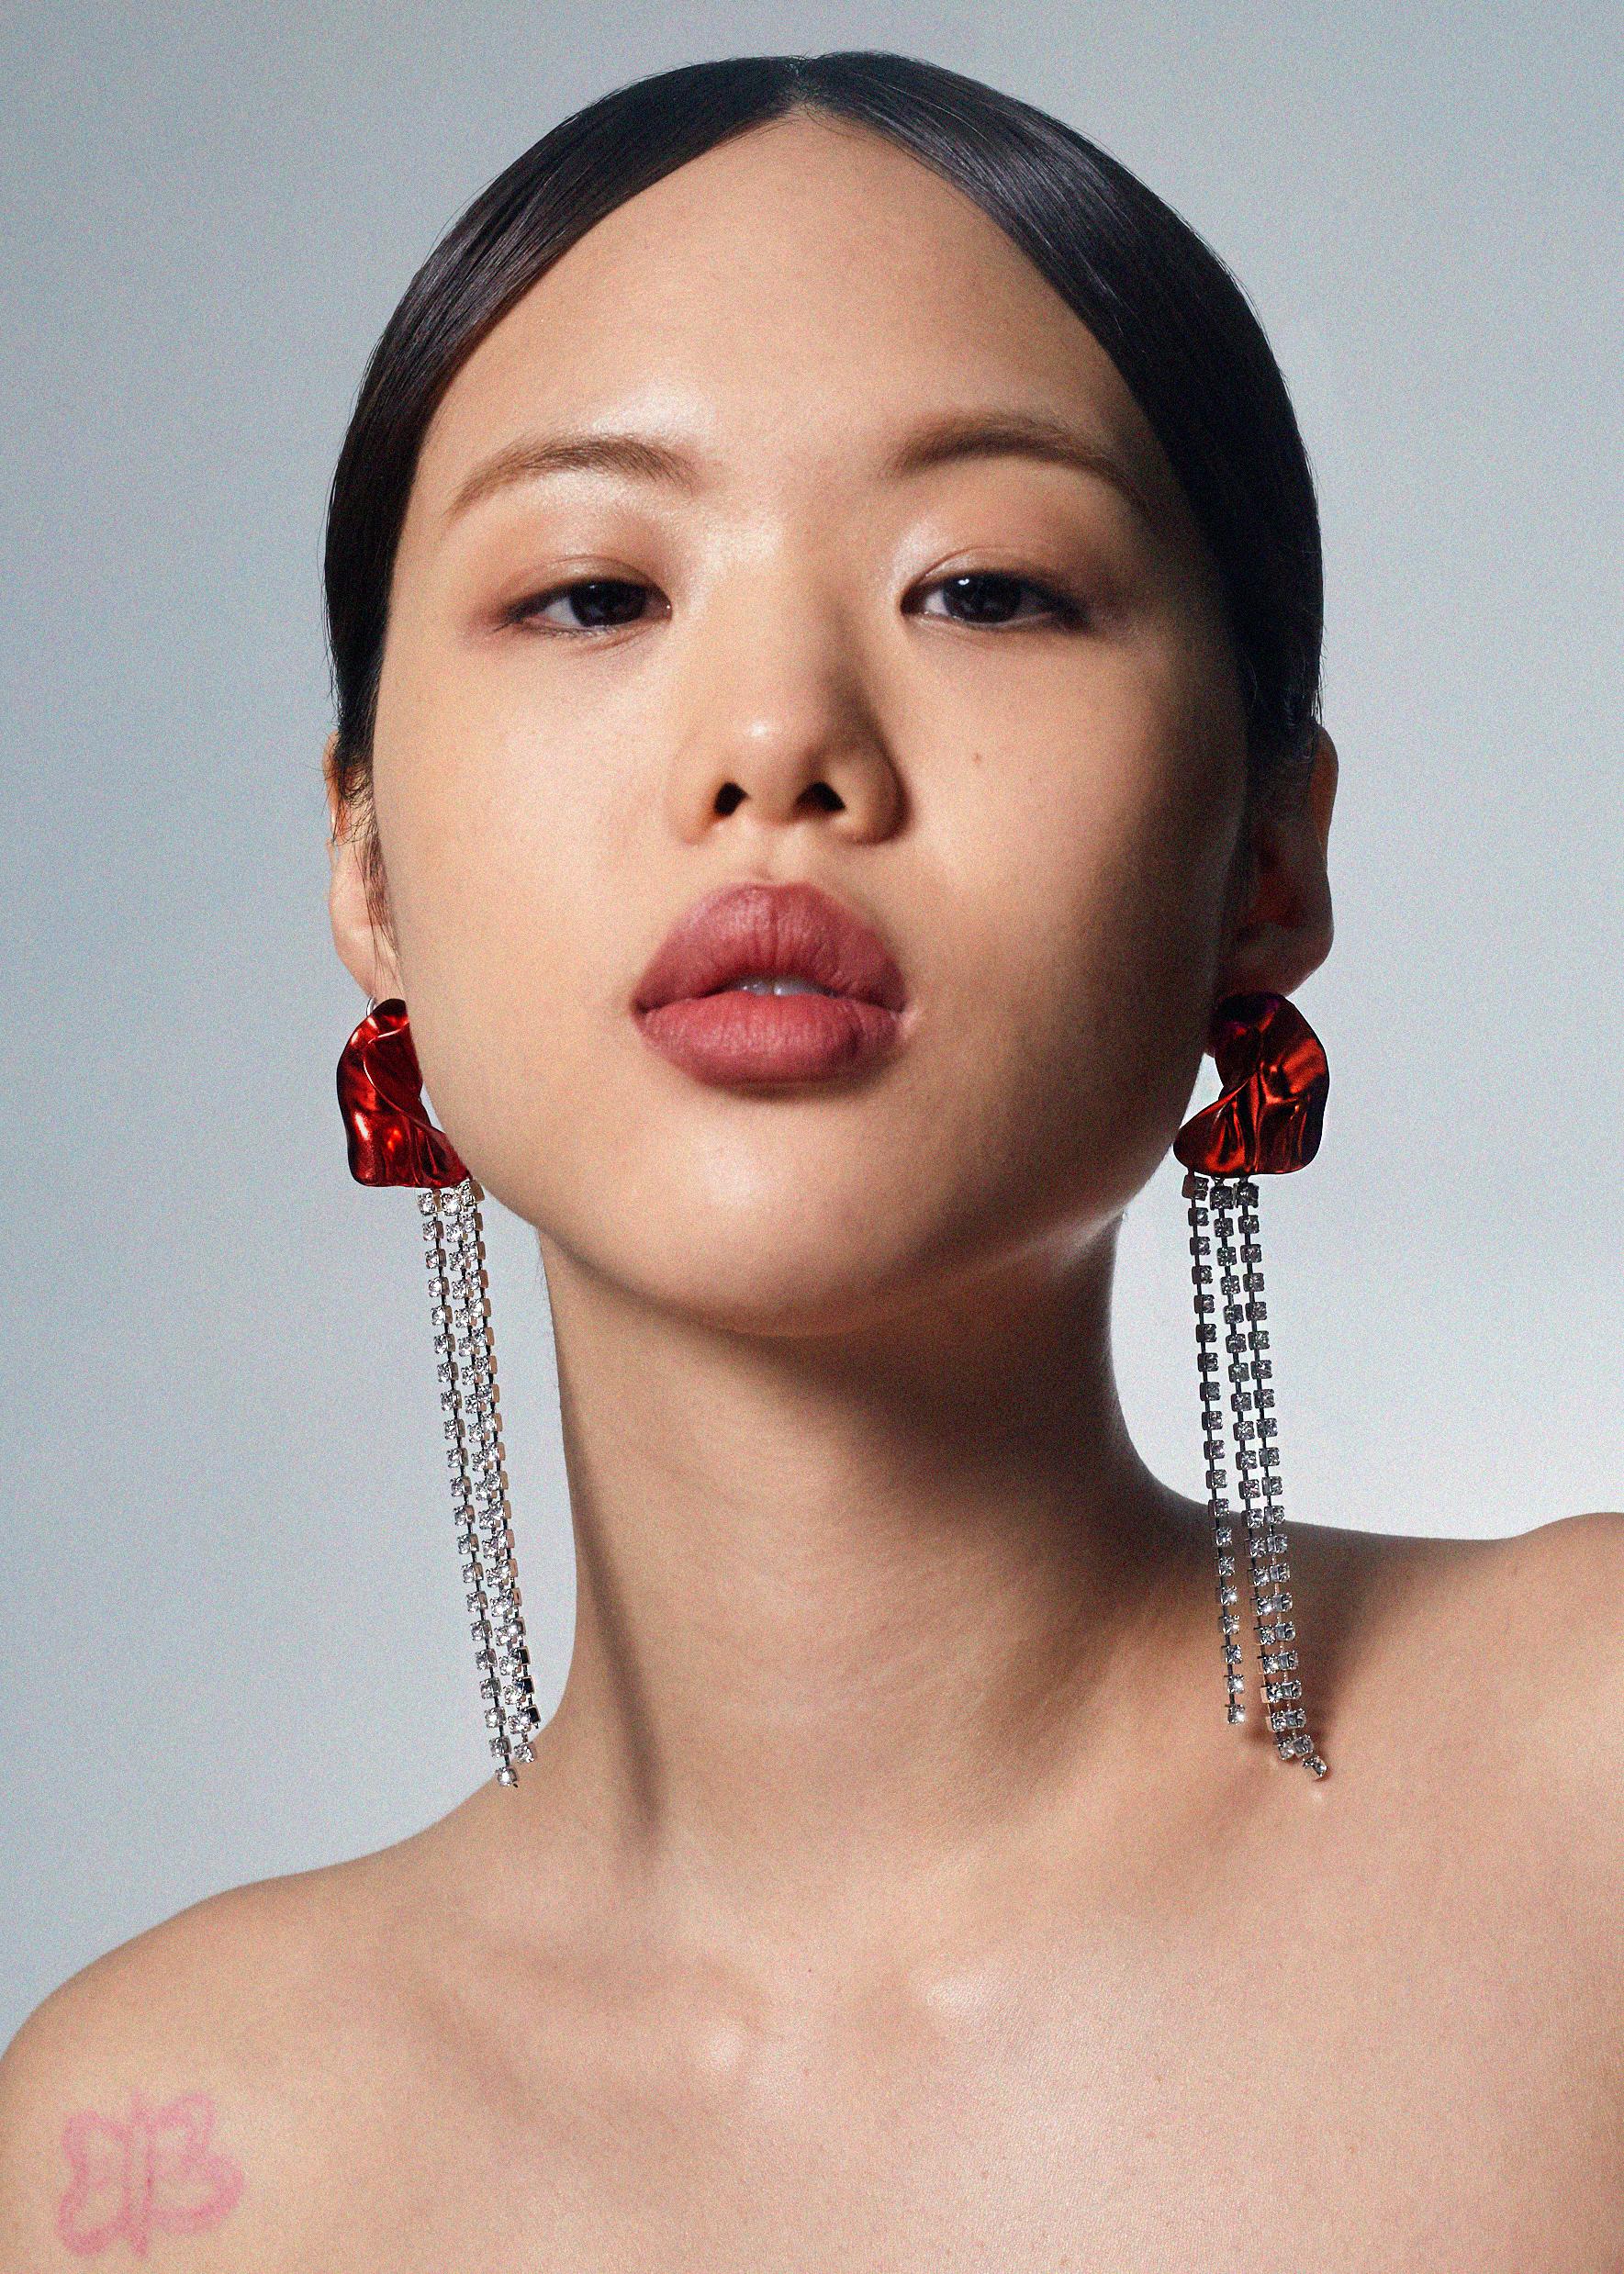 The Georgia crystal-embellished earrings from Sterling King feature a sculptural shape embellished with cascading clear crystals. Inspired by the works of Georgia O'Keeffe, these floral-inspired earrings are finished with vibrant red ceramic